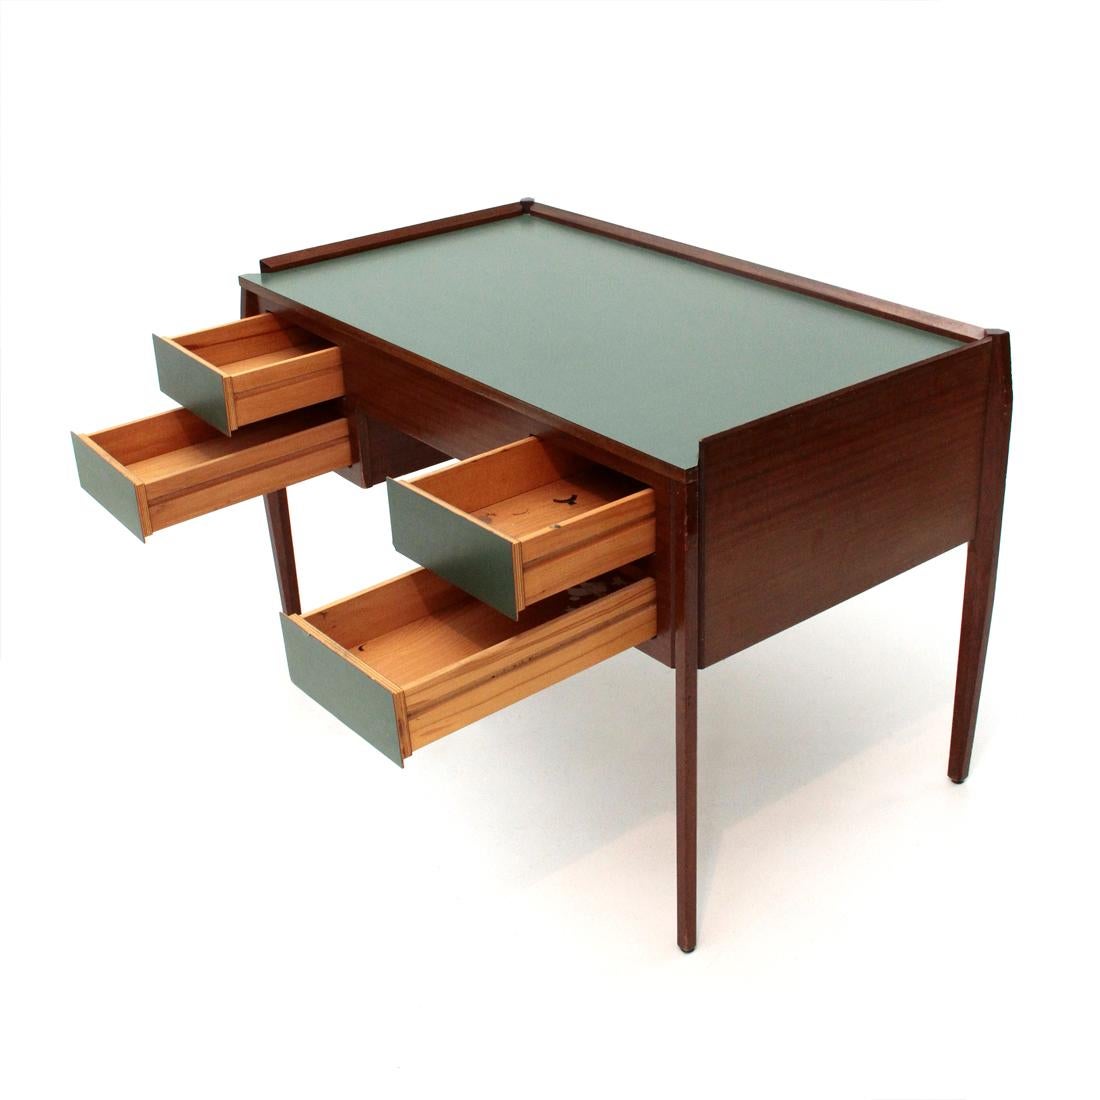 Mid-20th Century Italian Mid-Century Modern Desk with Formica Top, 1960s